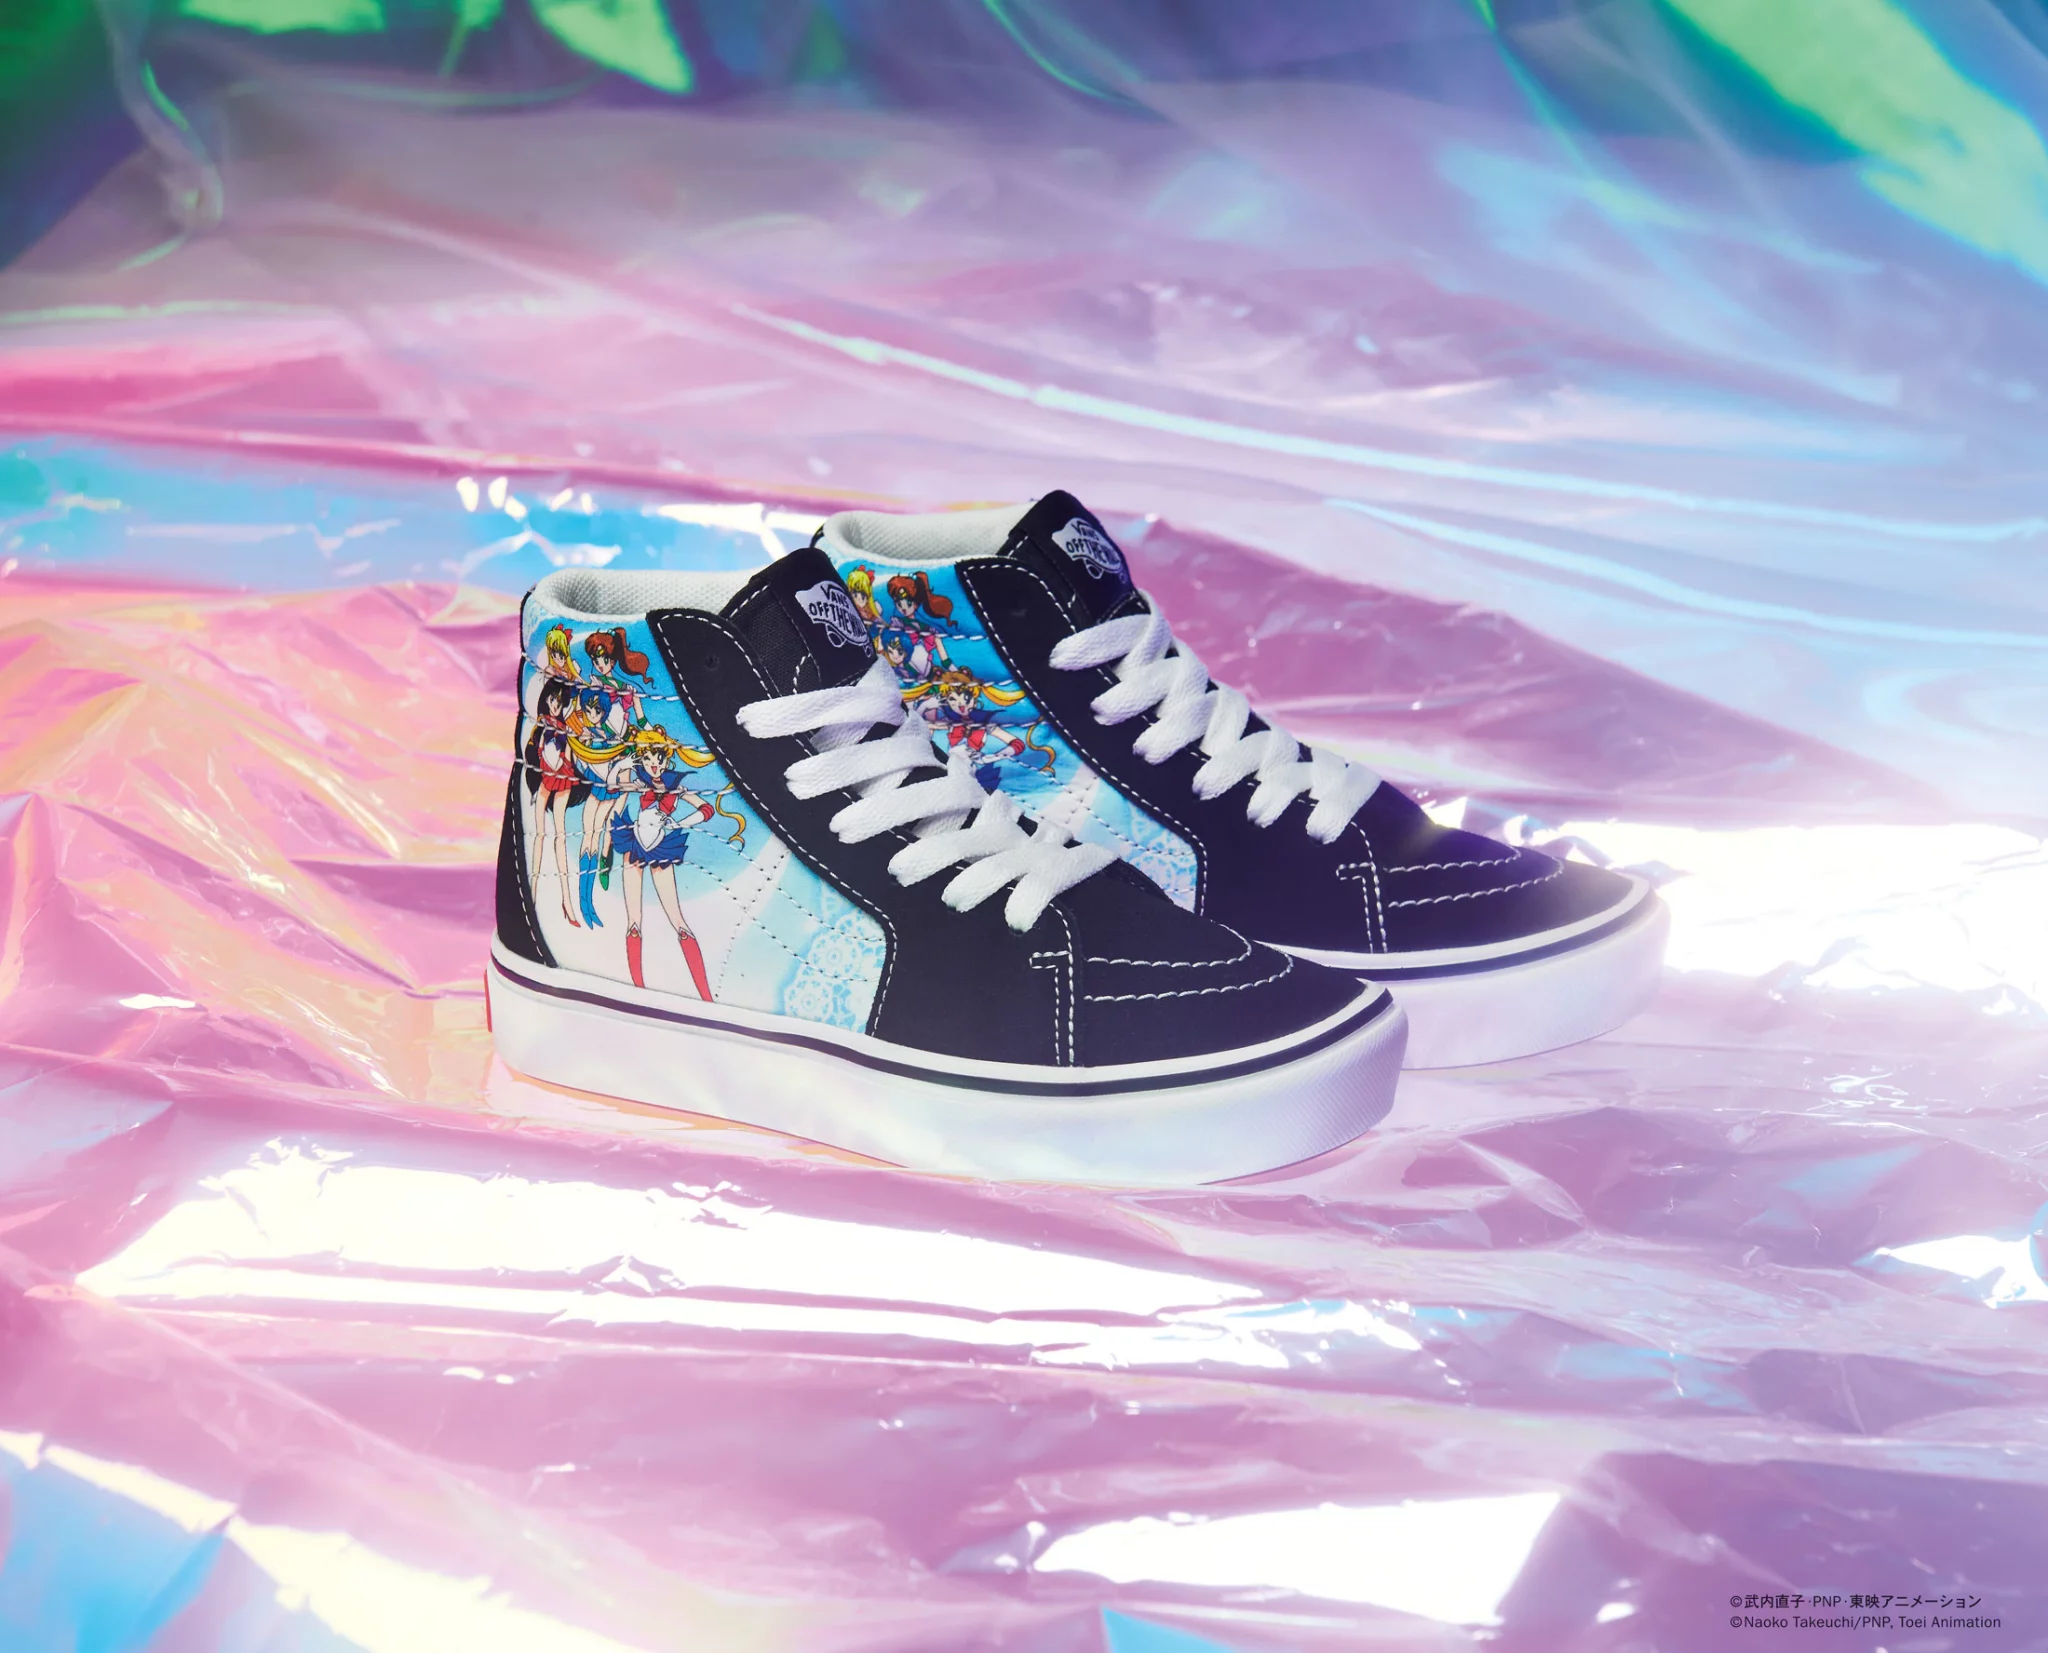 vans sailor moon collection 7 scaled